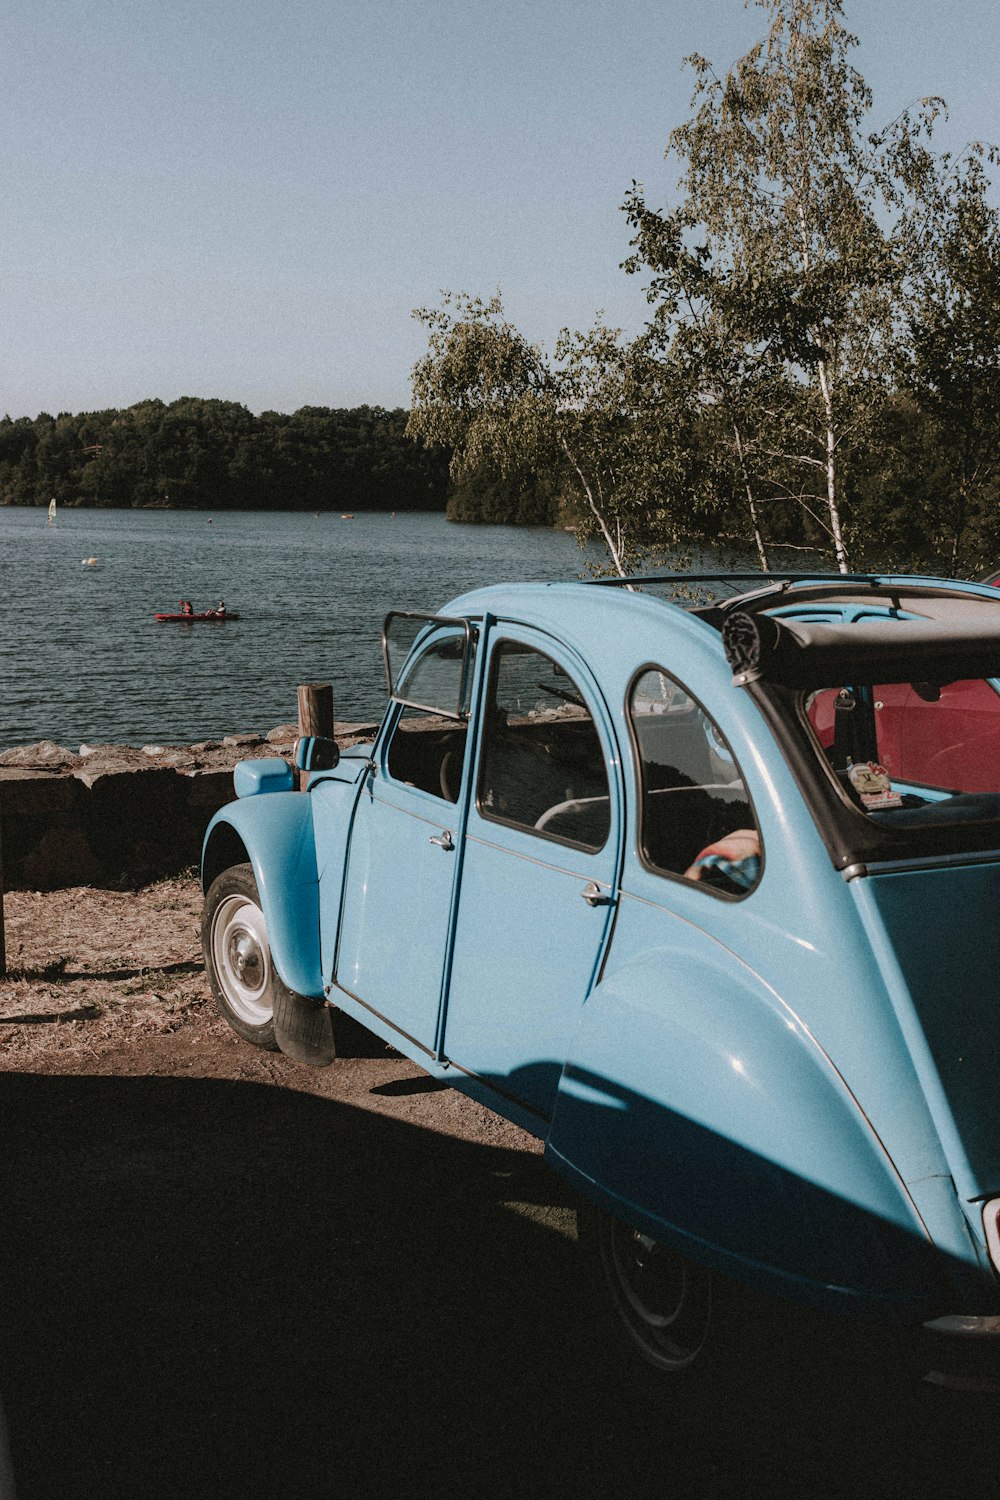 blue and white vintage car parked beside body of water during daytime